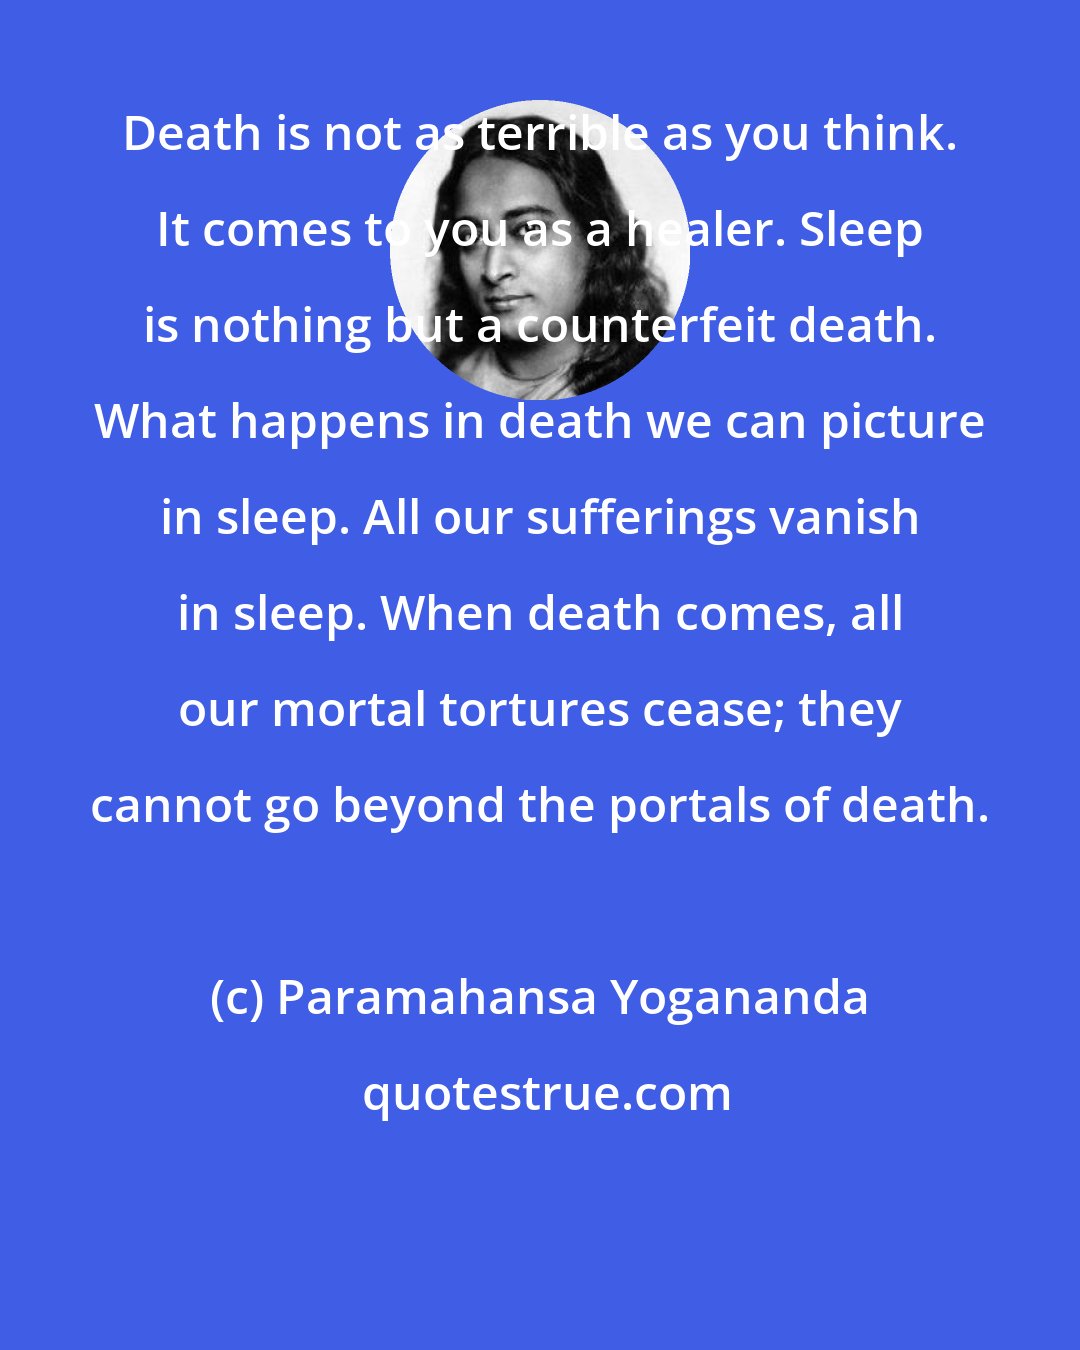 Paramahansa Yogananda: Death is not as terrible as you think. It comes to you as a healer. Sleep is nothing but a counterfeit death. What happens in death we can picture in sleep. All our sufferings vanish in sleep. When death comes, all our mortal tortures cease; they cannot go beyond the portals of death.